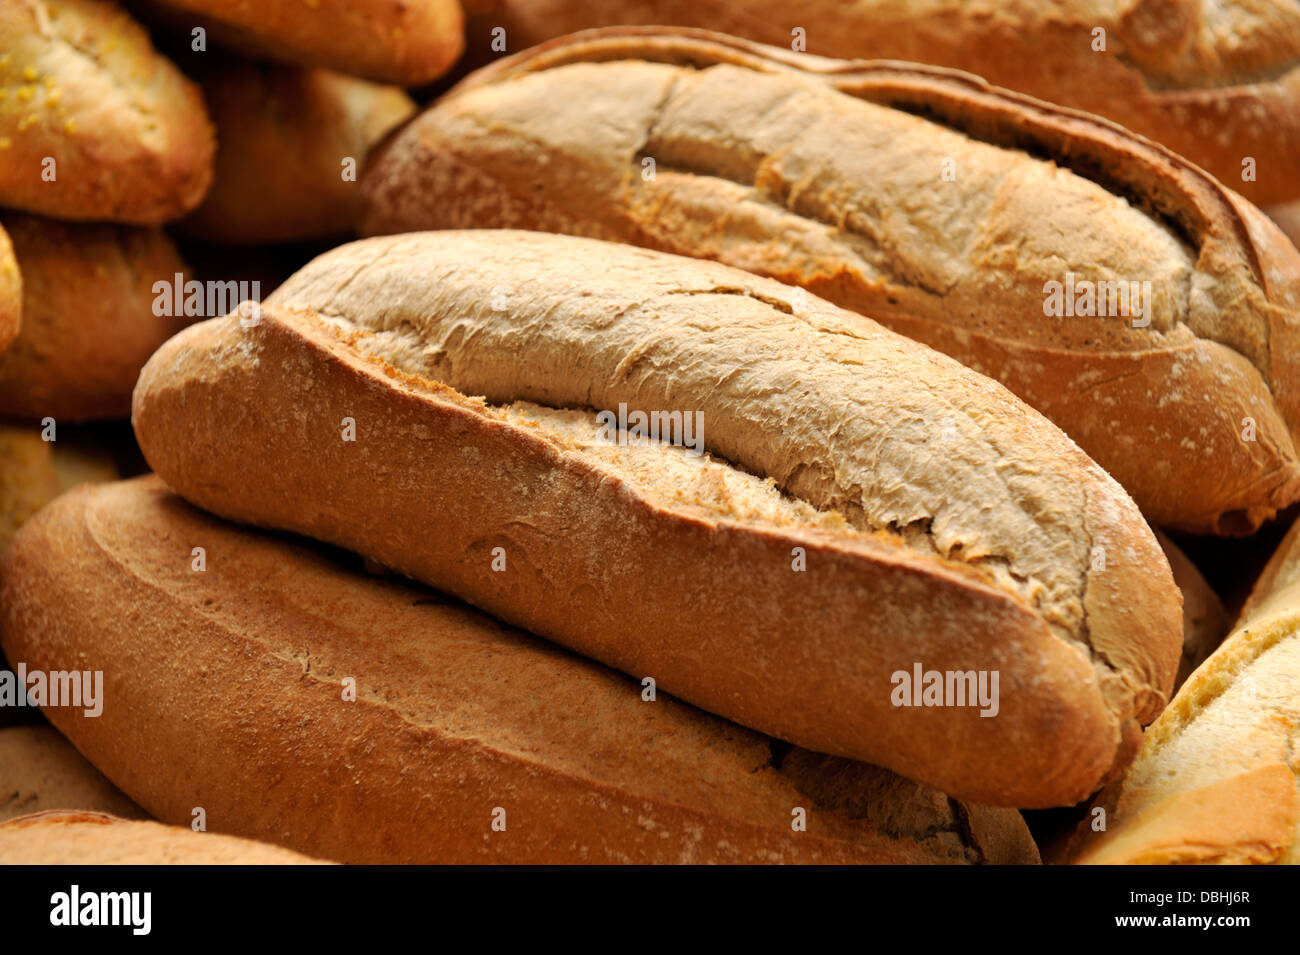 Loaves of fresh backed bread stacked for sale Stock Photo